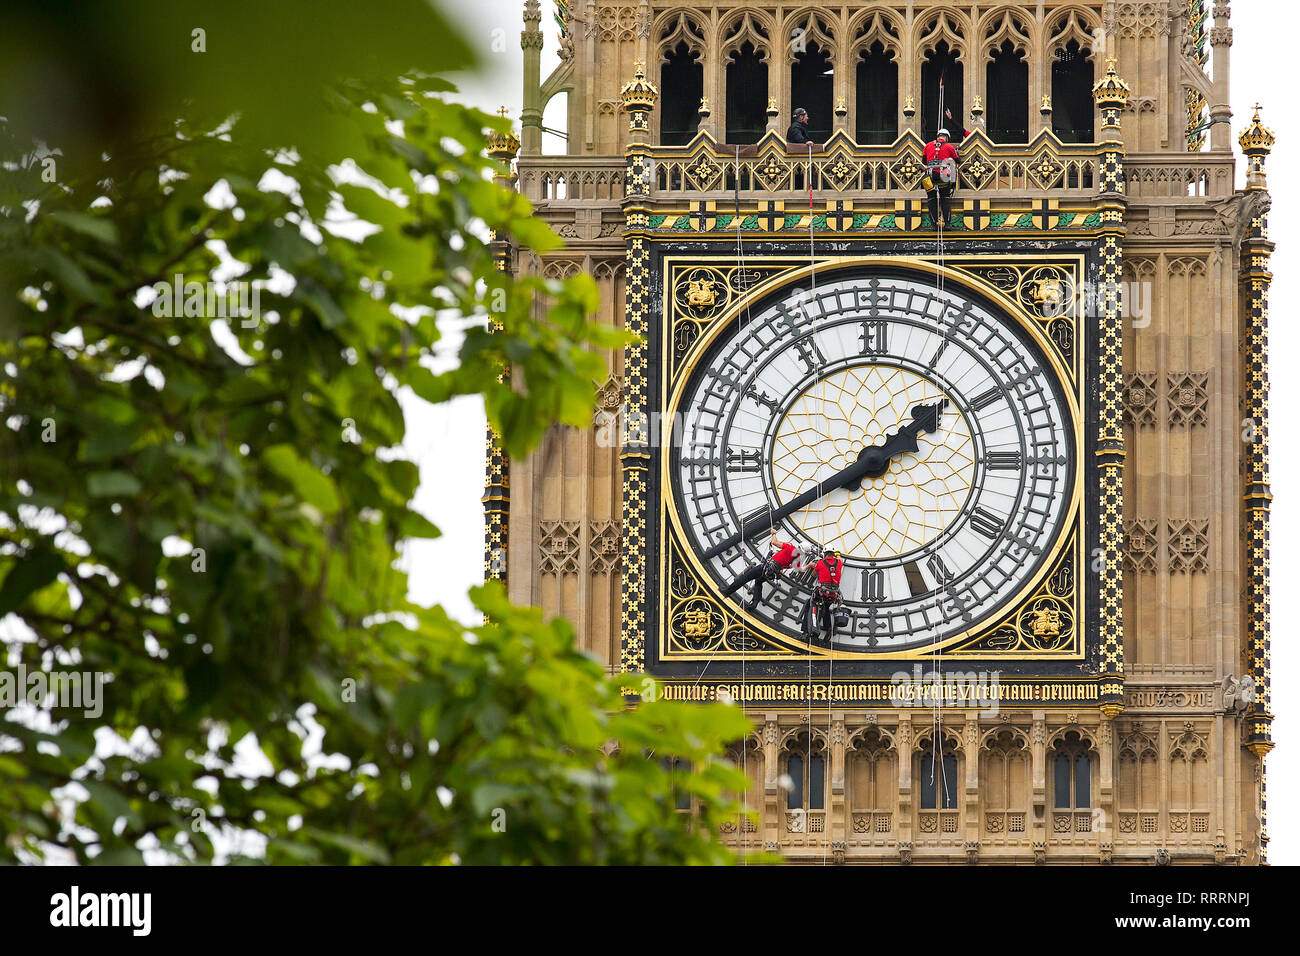 Workers clean the clock face of the Elizabeth Tower (Big Ben) of the Houses of Parliament on August 21, 2014. Stock Photo